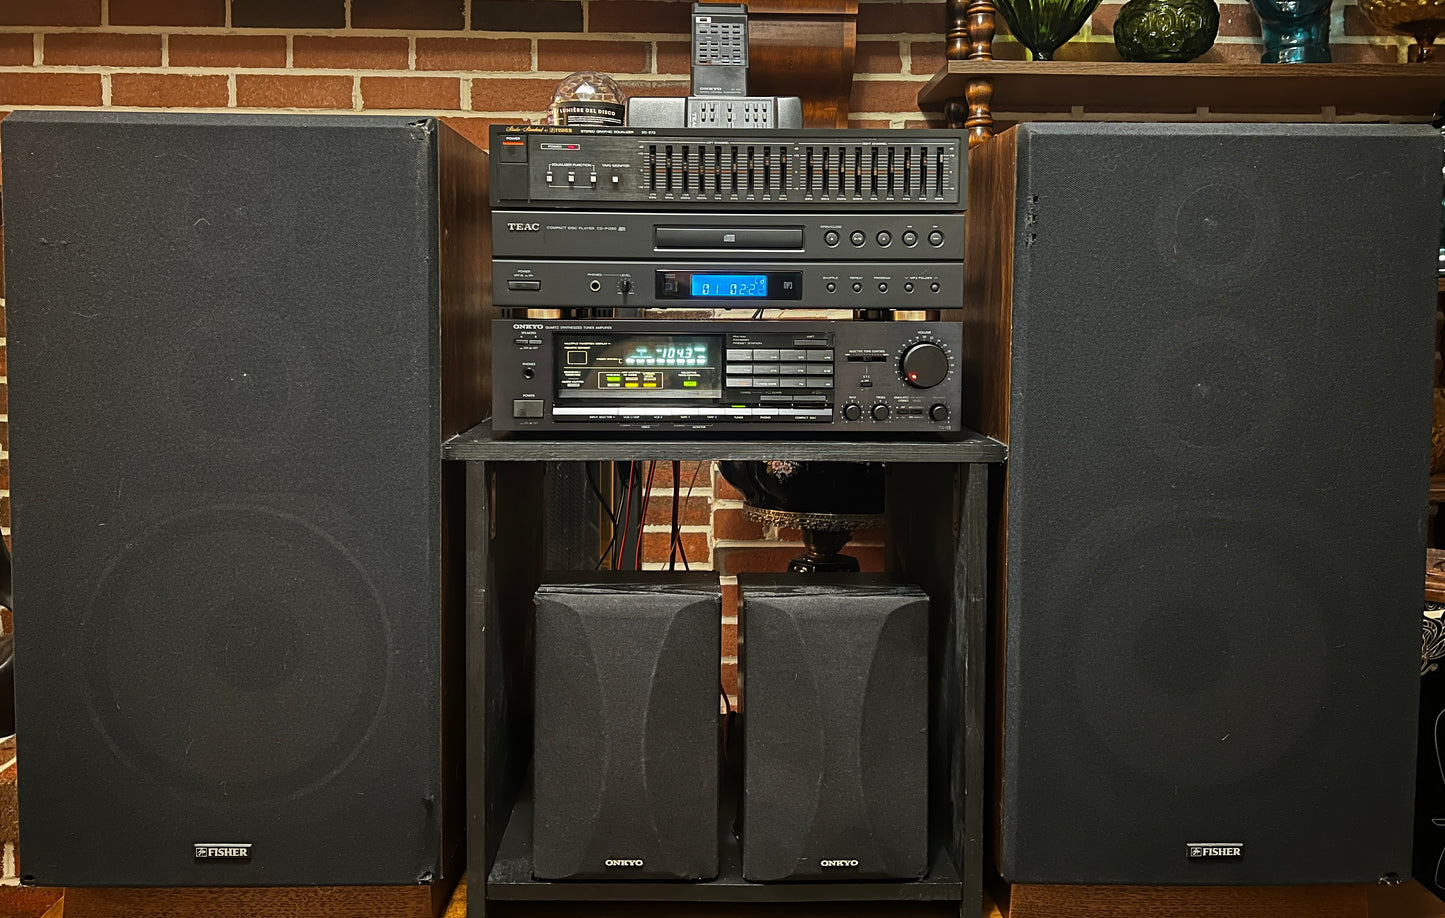 Onkyo/Fisher Stereo System, Onkyo Receiver + Bluetooth, Teac CD Player, Fisher EQ & Speakers!!!